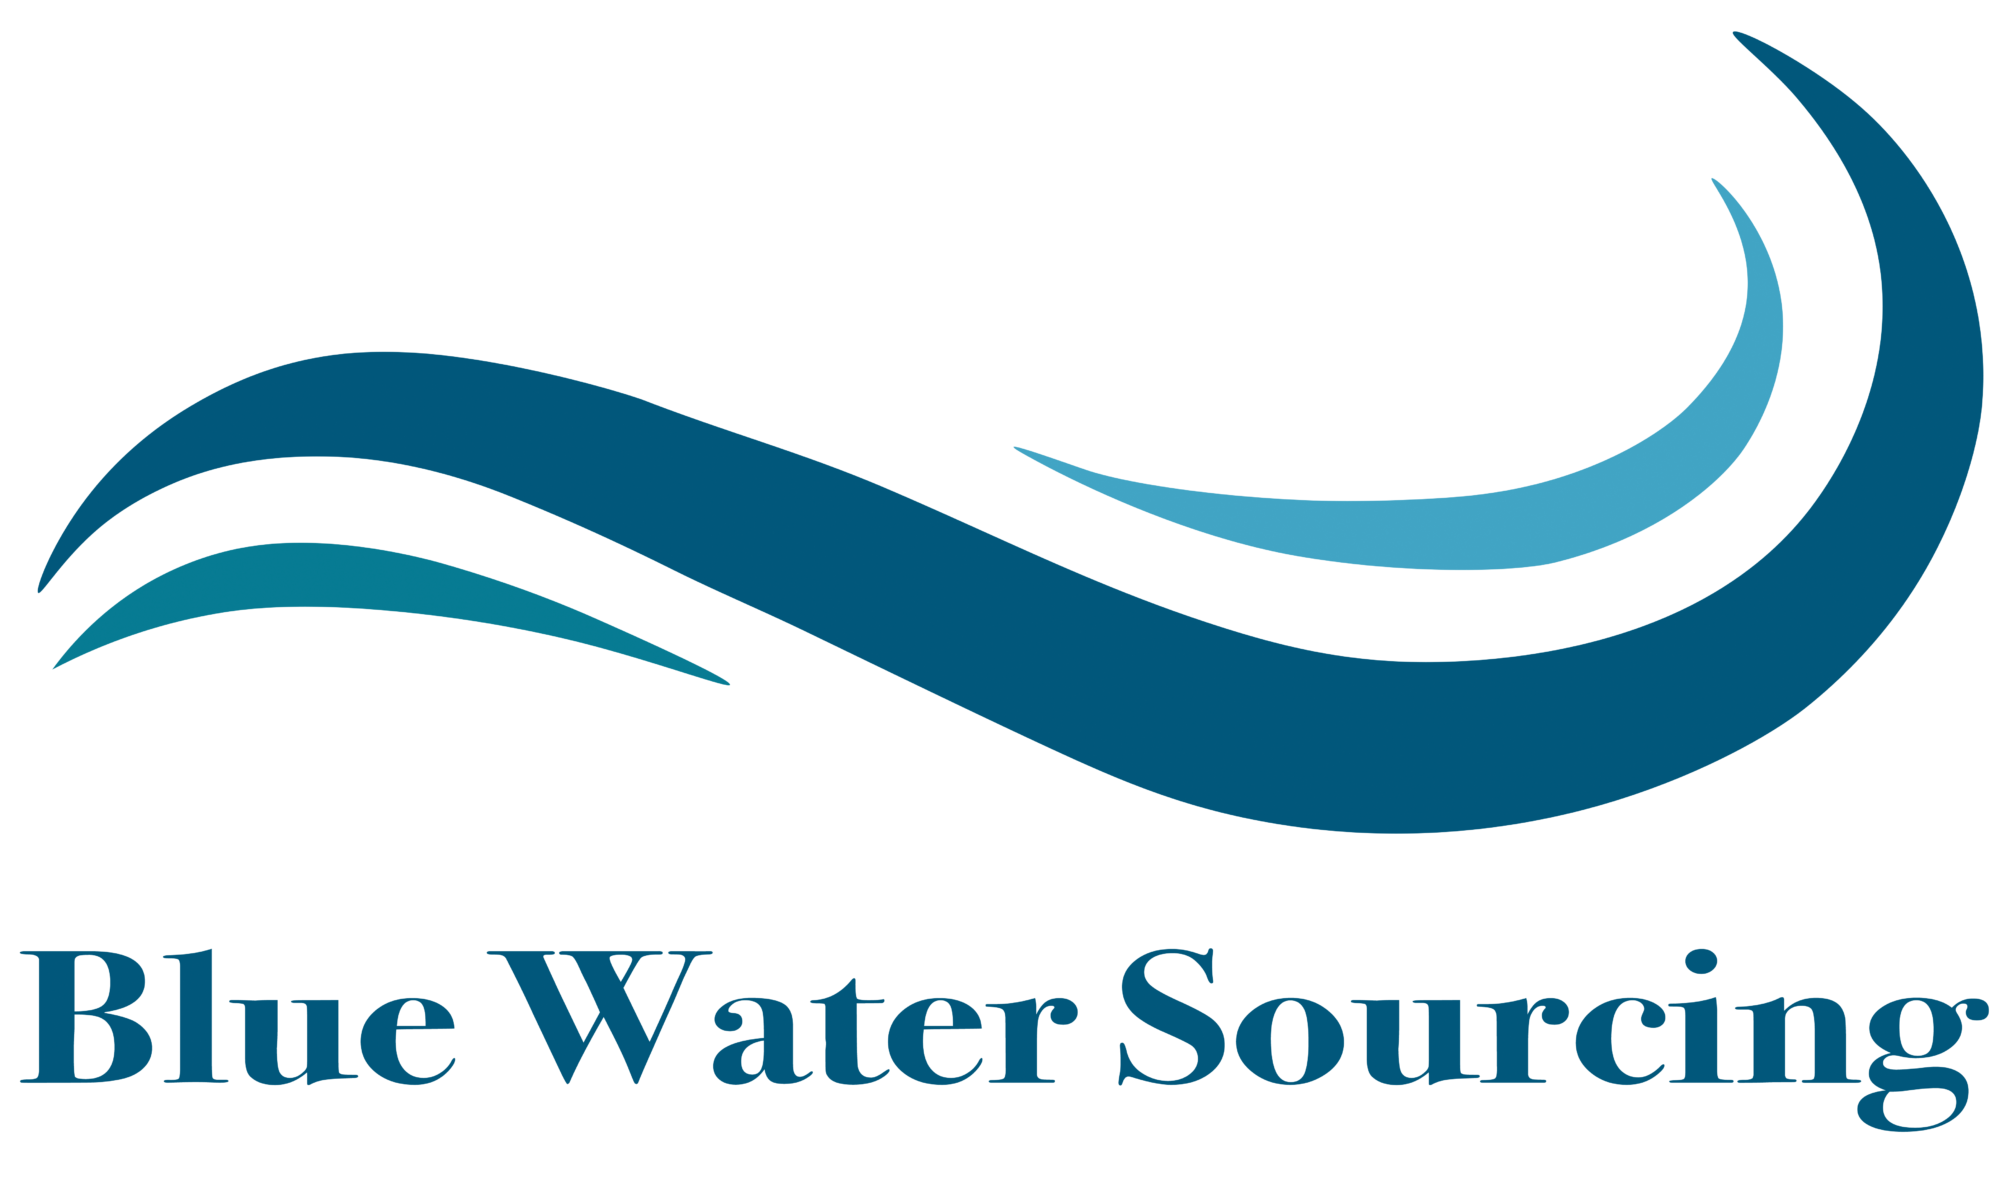 Blue Water Sourcing